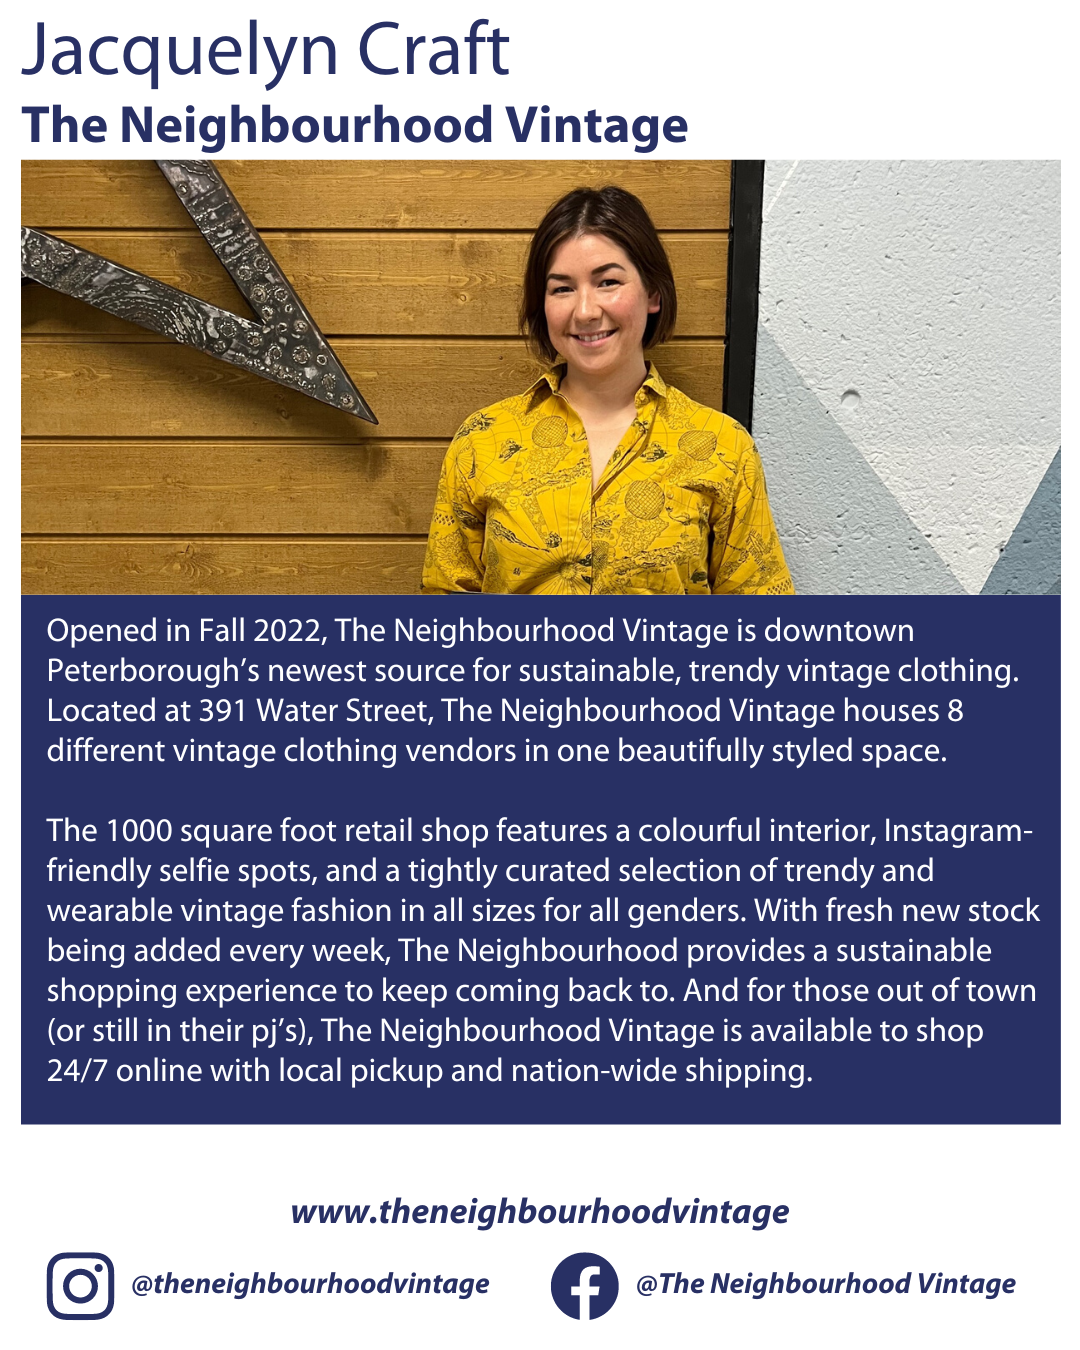 Jacquelyn Craft, The Neighbourhood Vintage bio and social channels